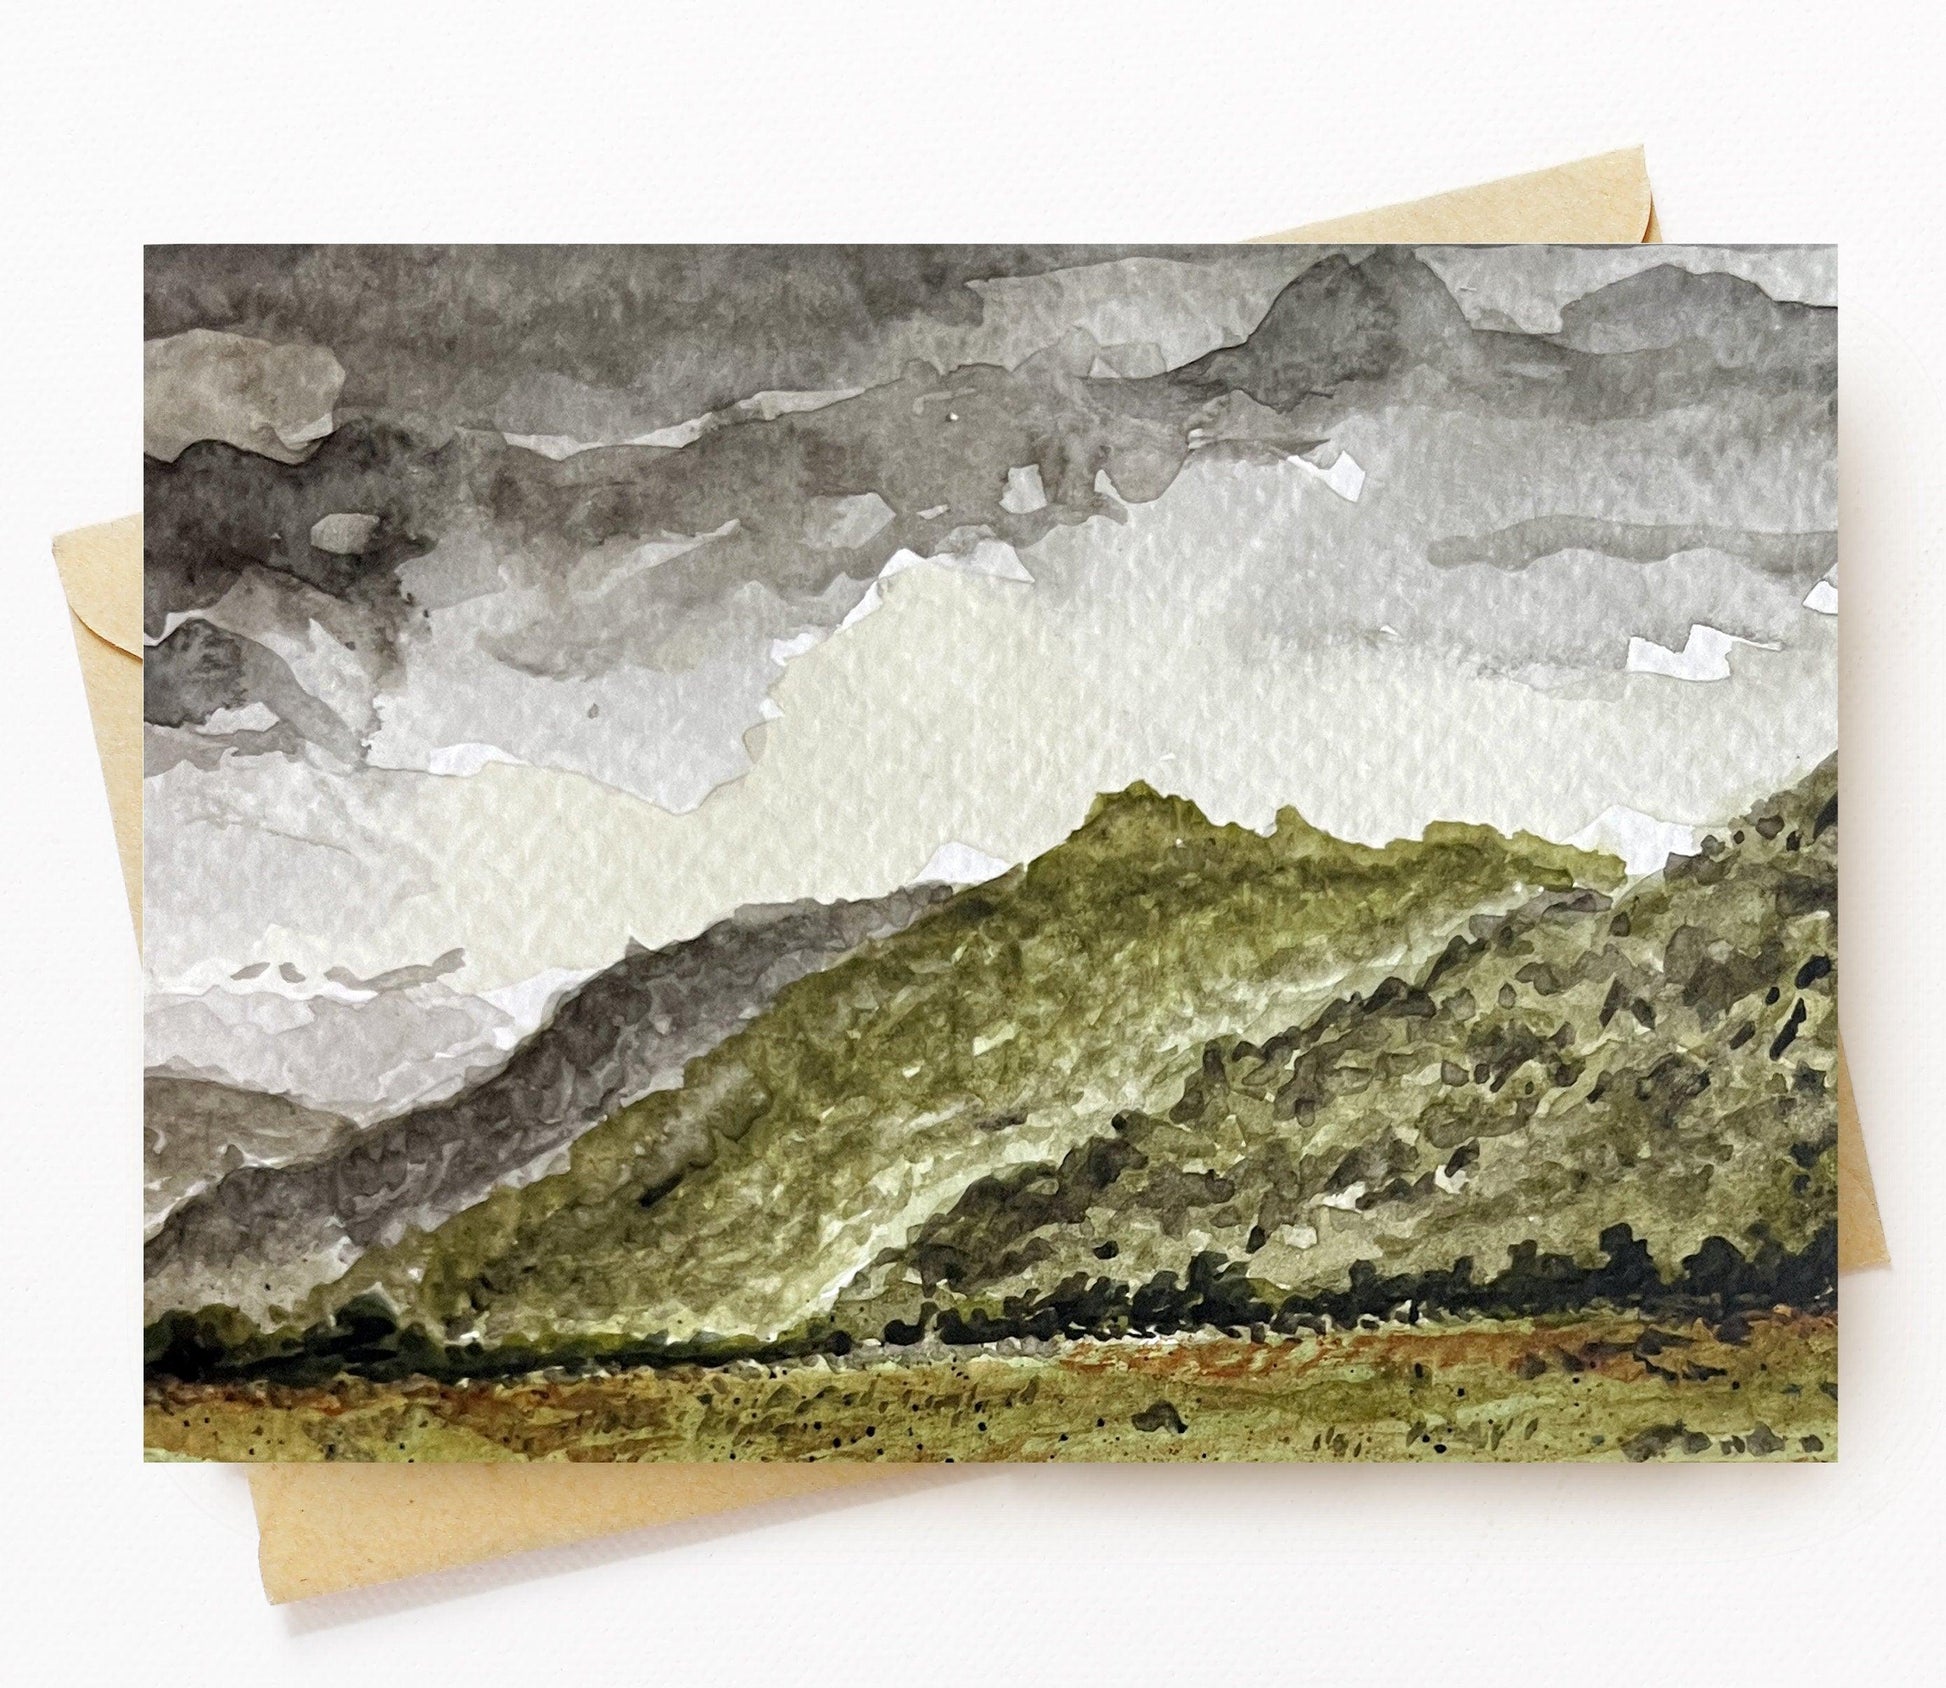 BellavanceInk: Greeting Card With Watercolor Of Fields And Meadows In The Blue Ridge Mountains Near Old Trail  5 x 7 Inches - BellavanceInk